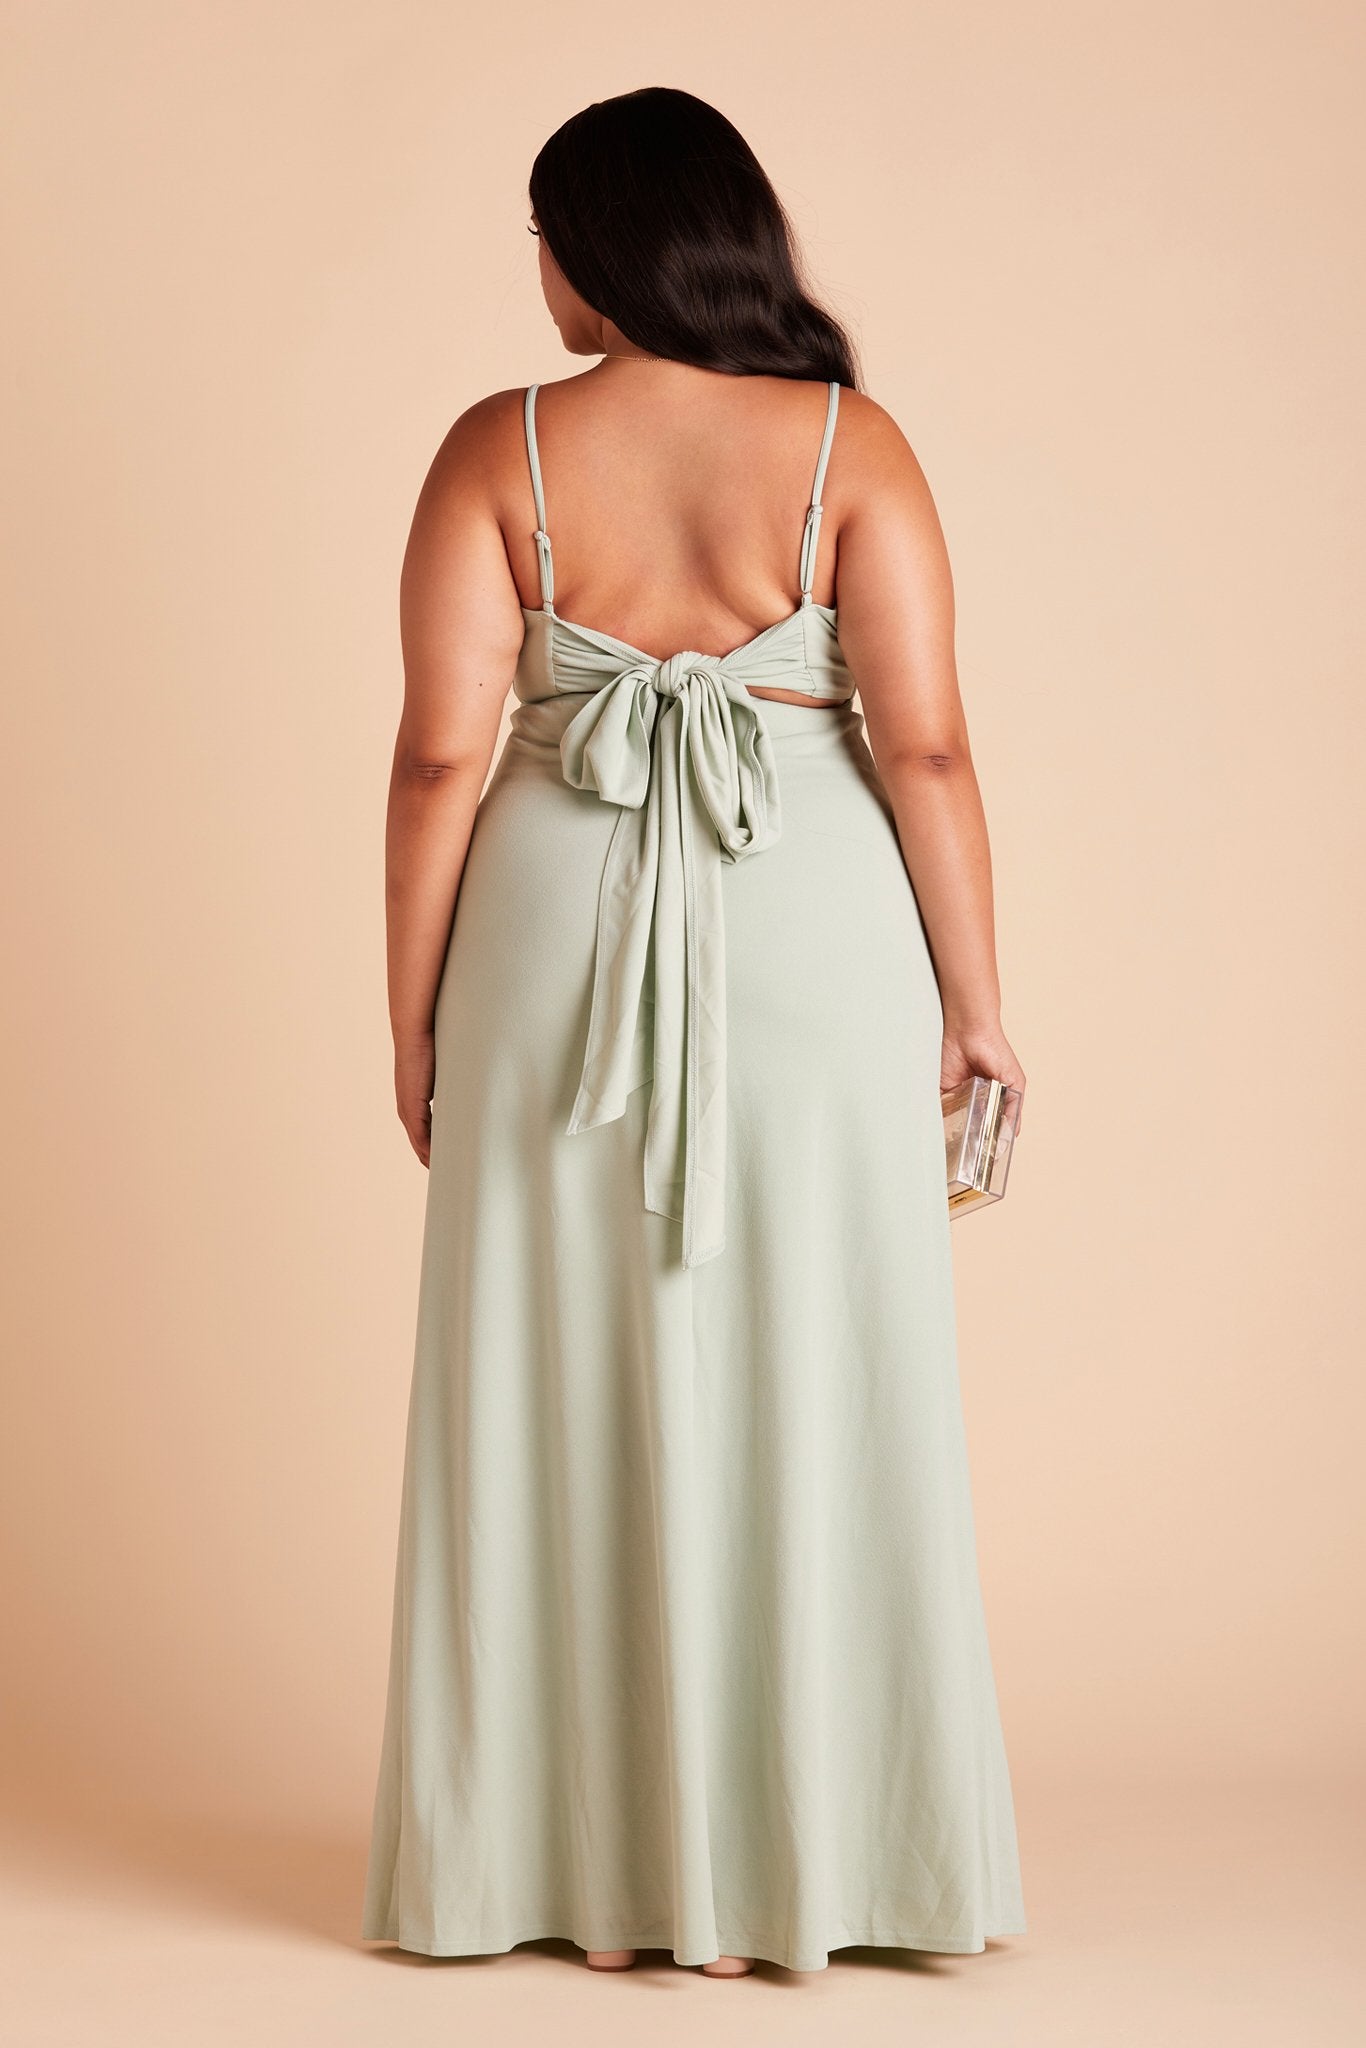 Benny plus size bridesmaid dress in sage green crepe by Birdy Grey, back view